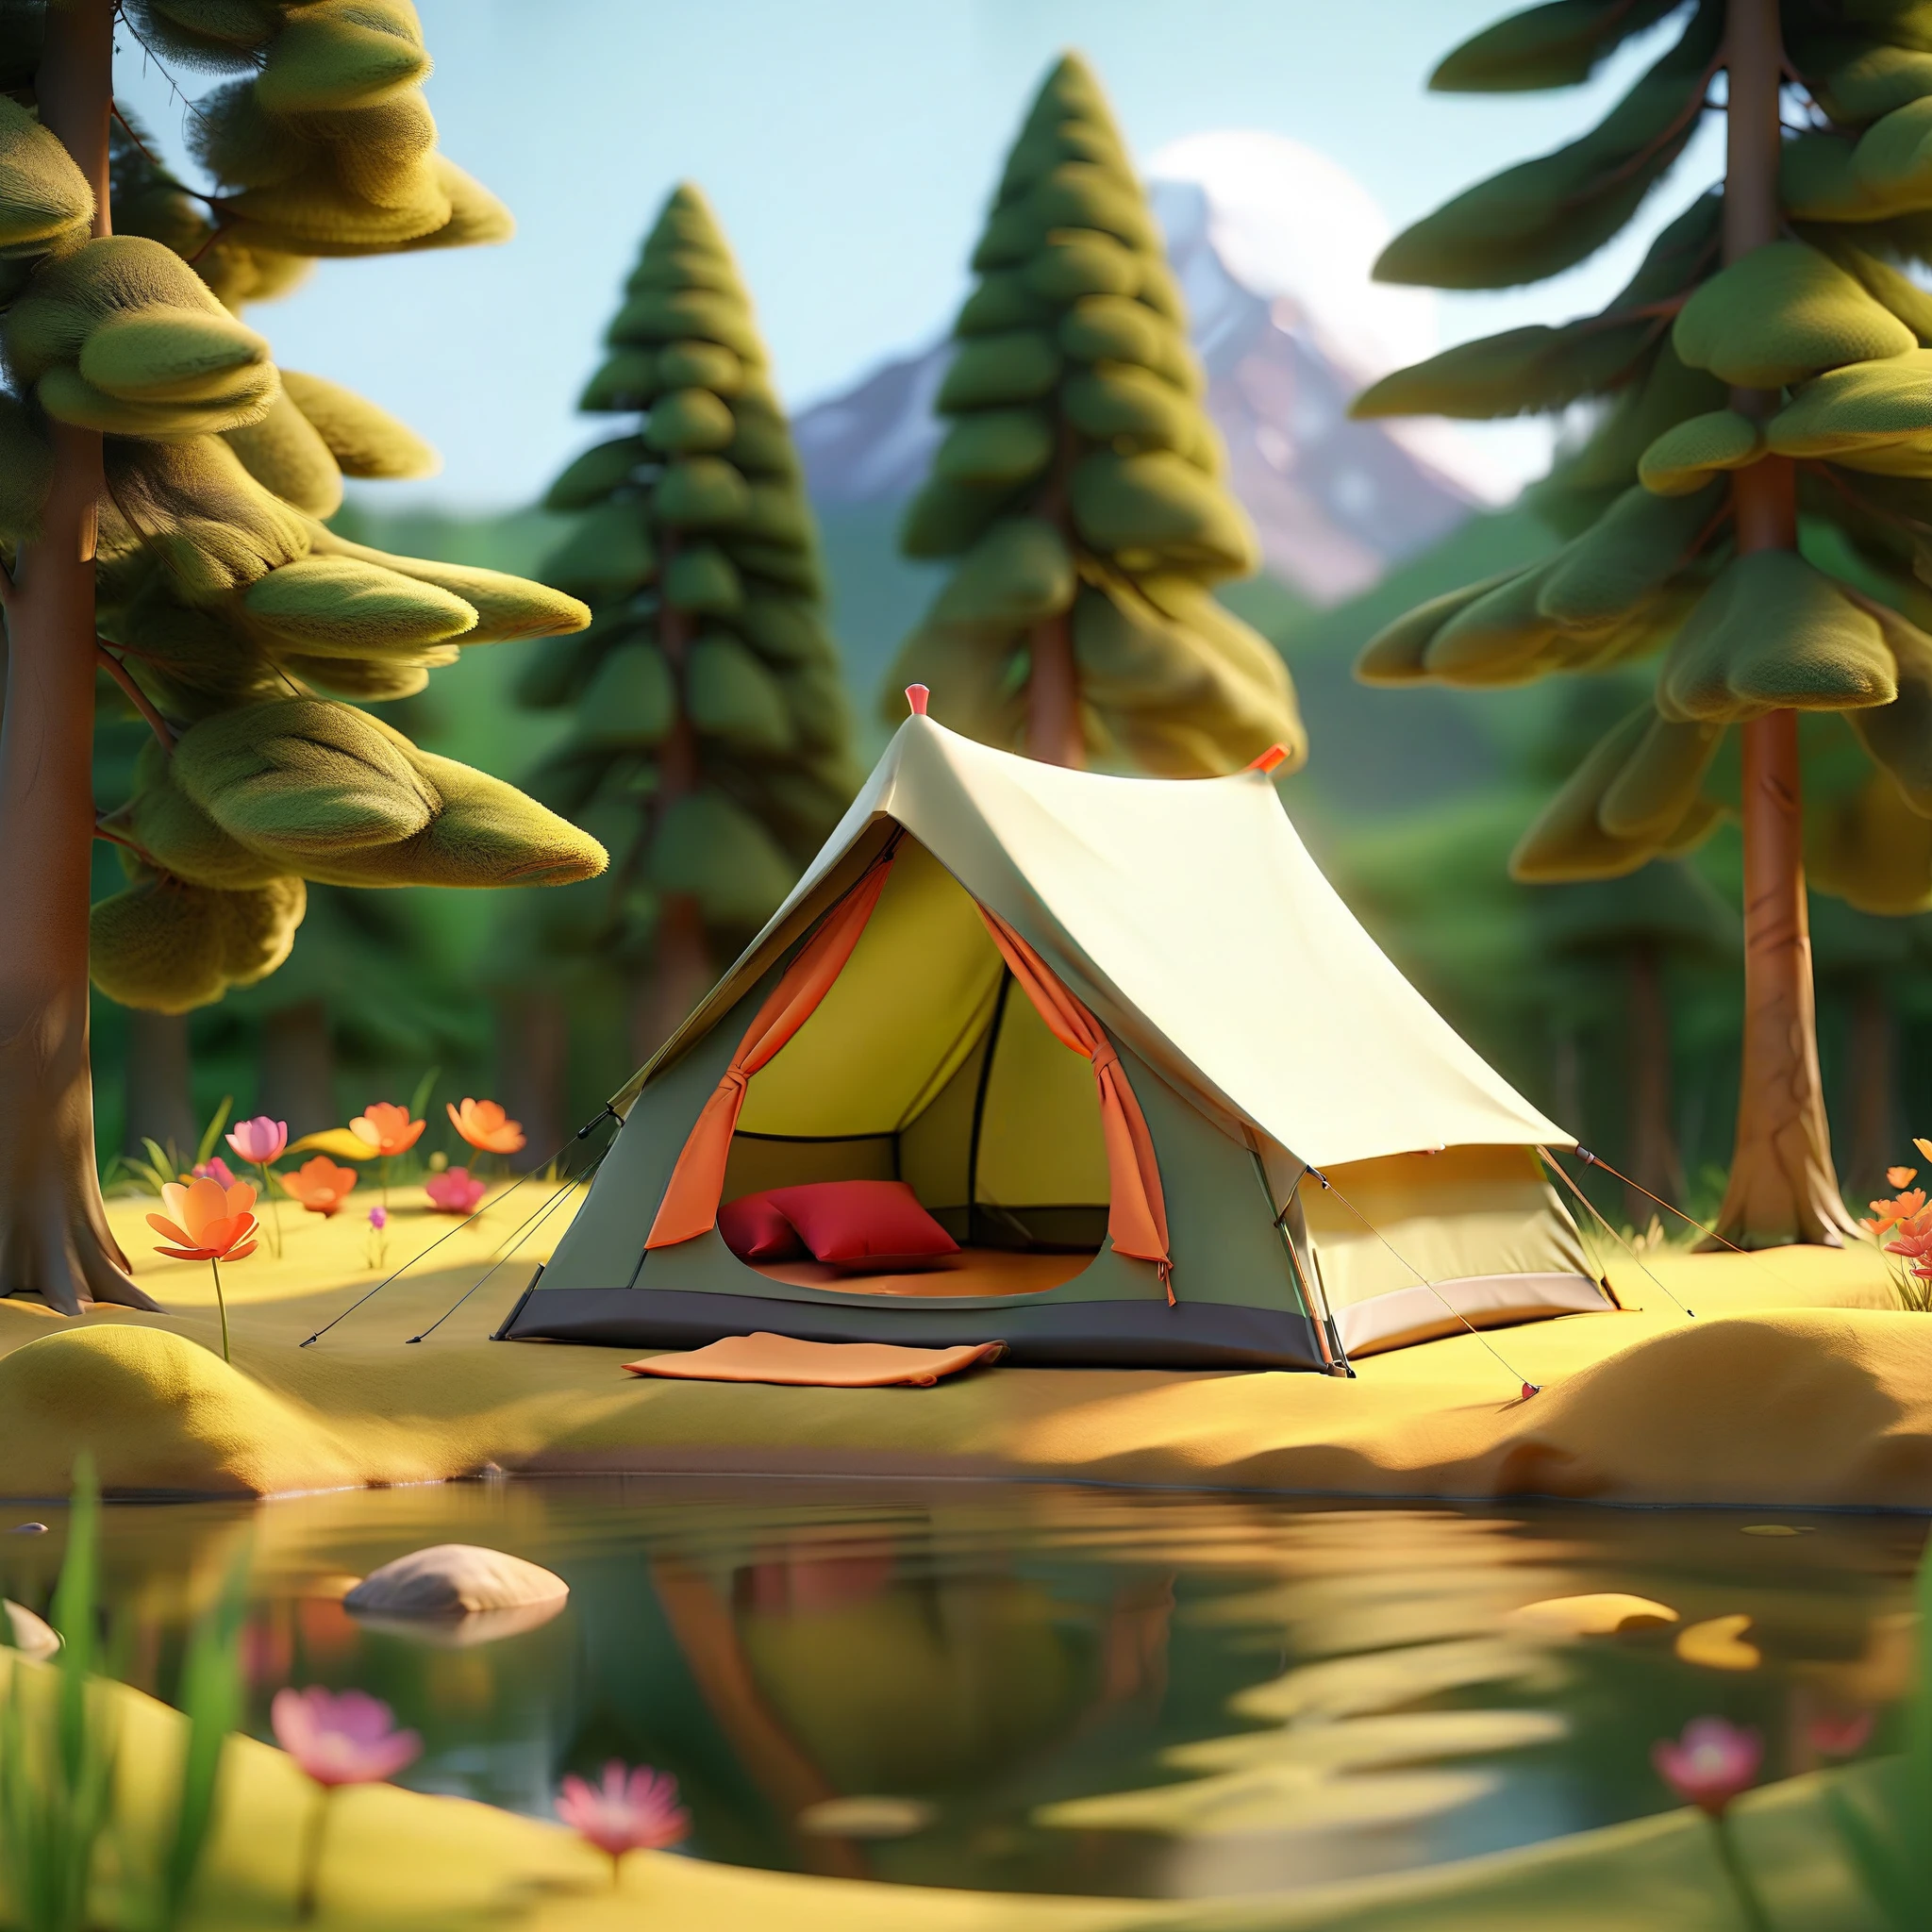 3D scene,3D,C4D,8k,(masterpiece, top quality, best quality, official art,((no text:1.5)),natural, unmanned, outdoor, forest, camping, scenery, flowers, tent, sky, grass, water, plants, leaves, trees, green theme, sunshine, camping tent, warm color sunshine,,